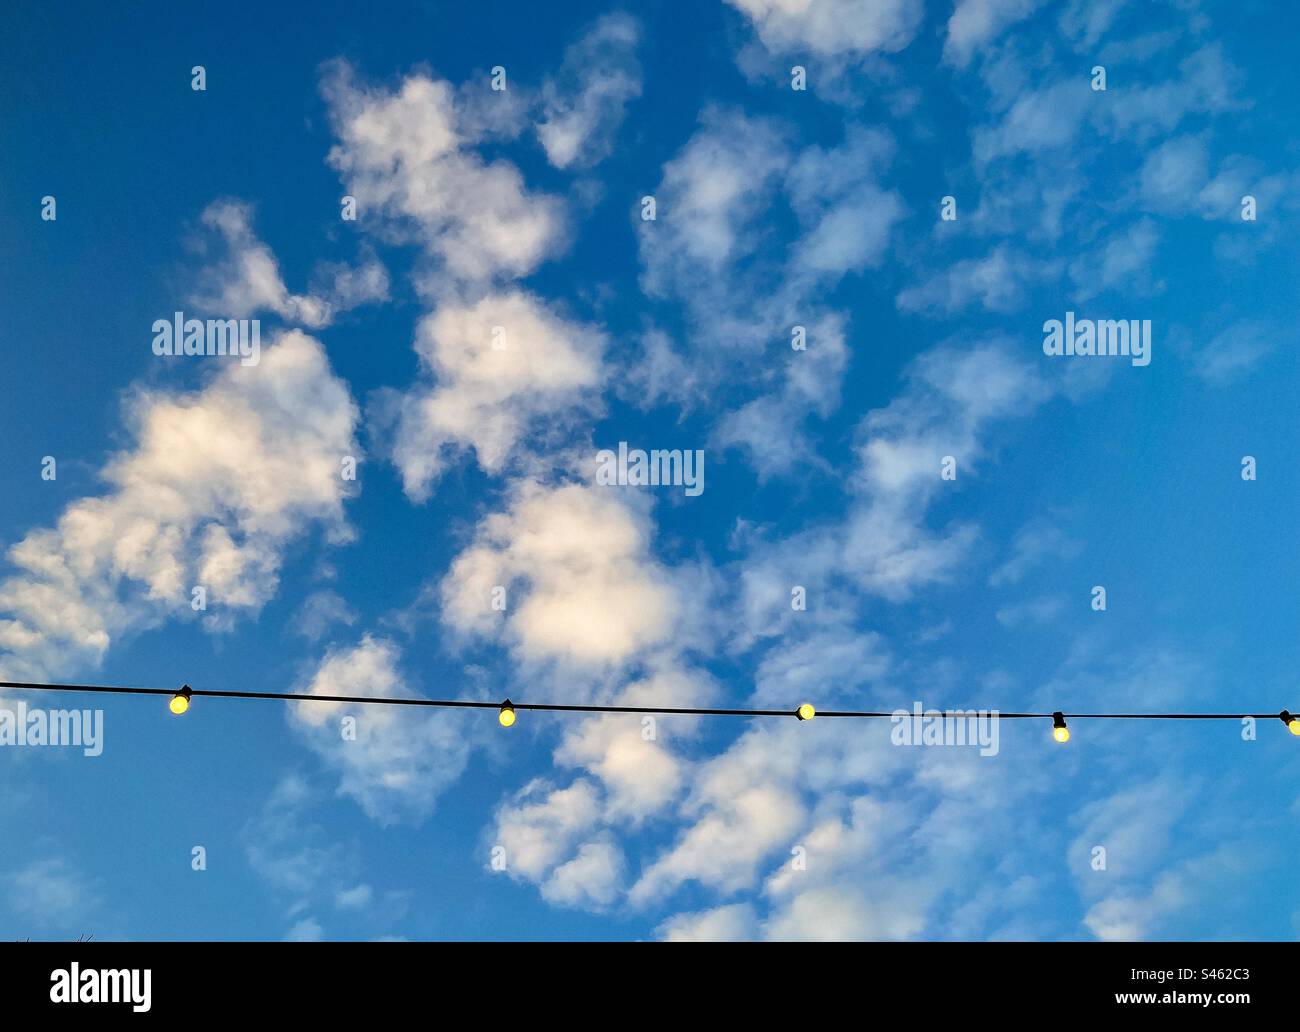 Low angle view of glowing light bulbs hanging from overhead line against blue sky with fluffy white clouds with copy space. String of light bulbs. Stock Photo